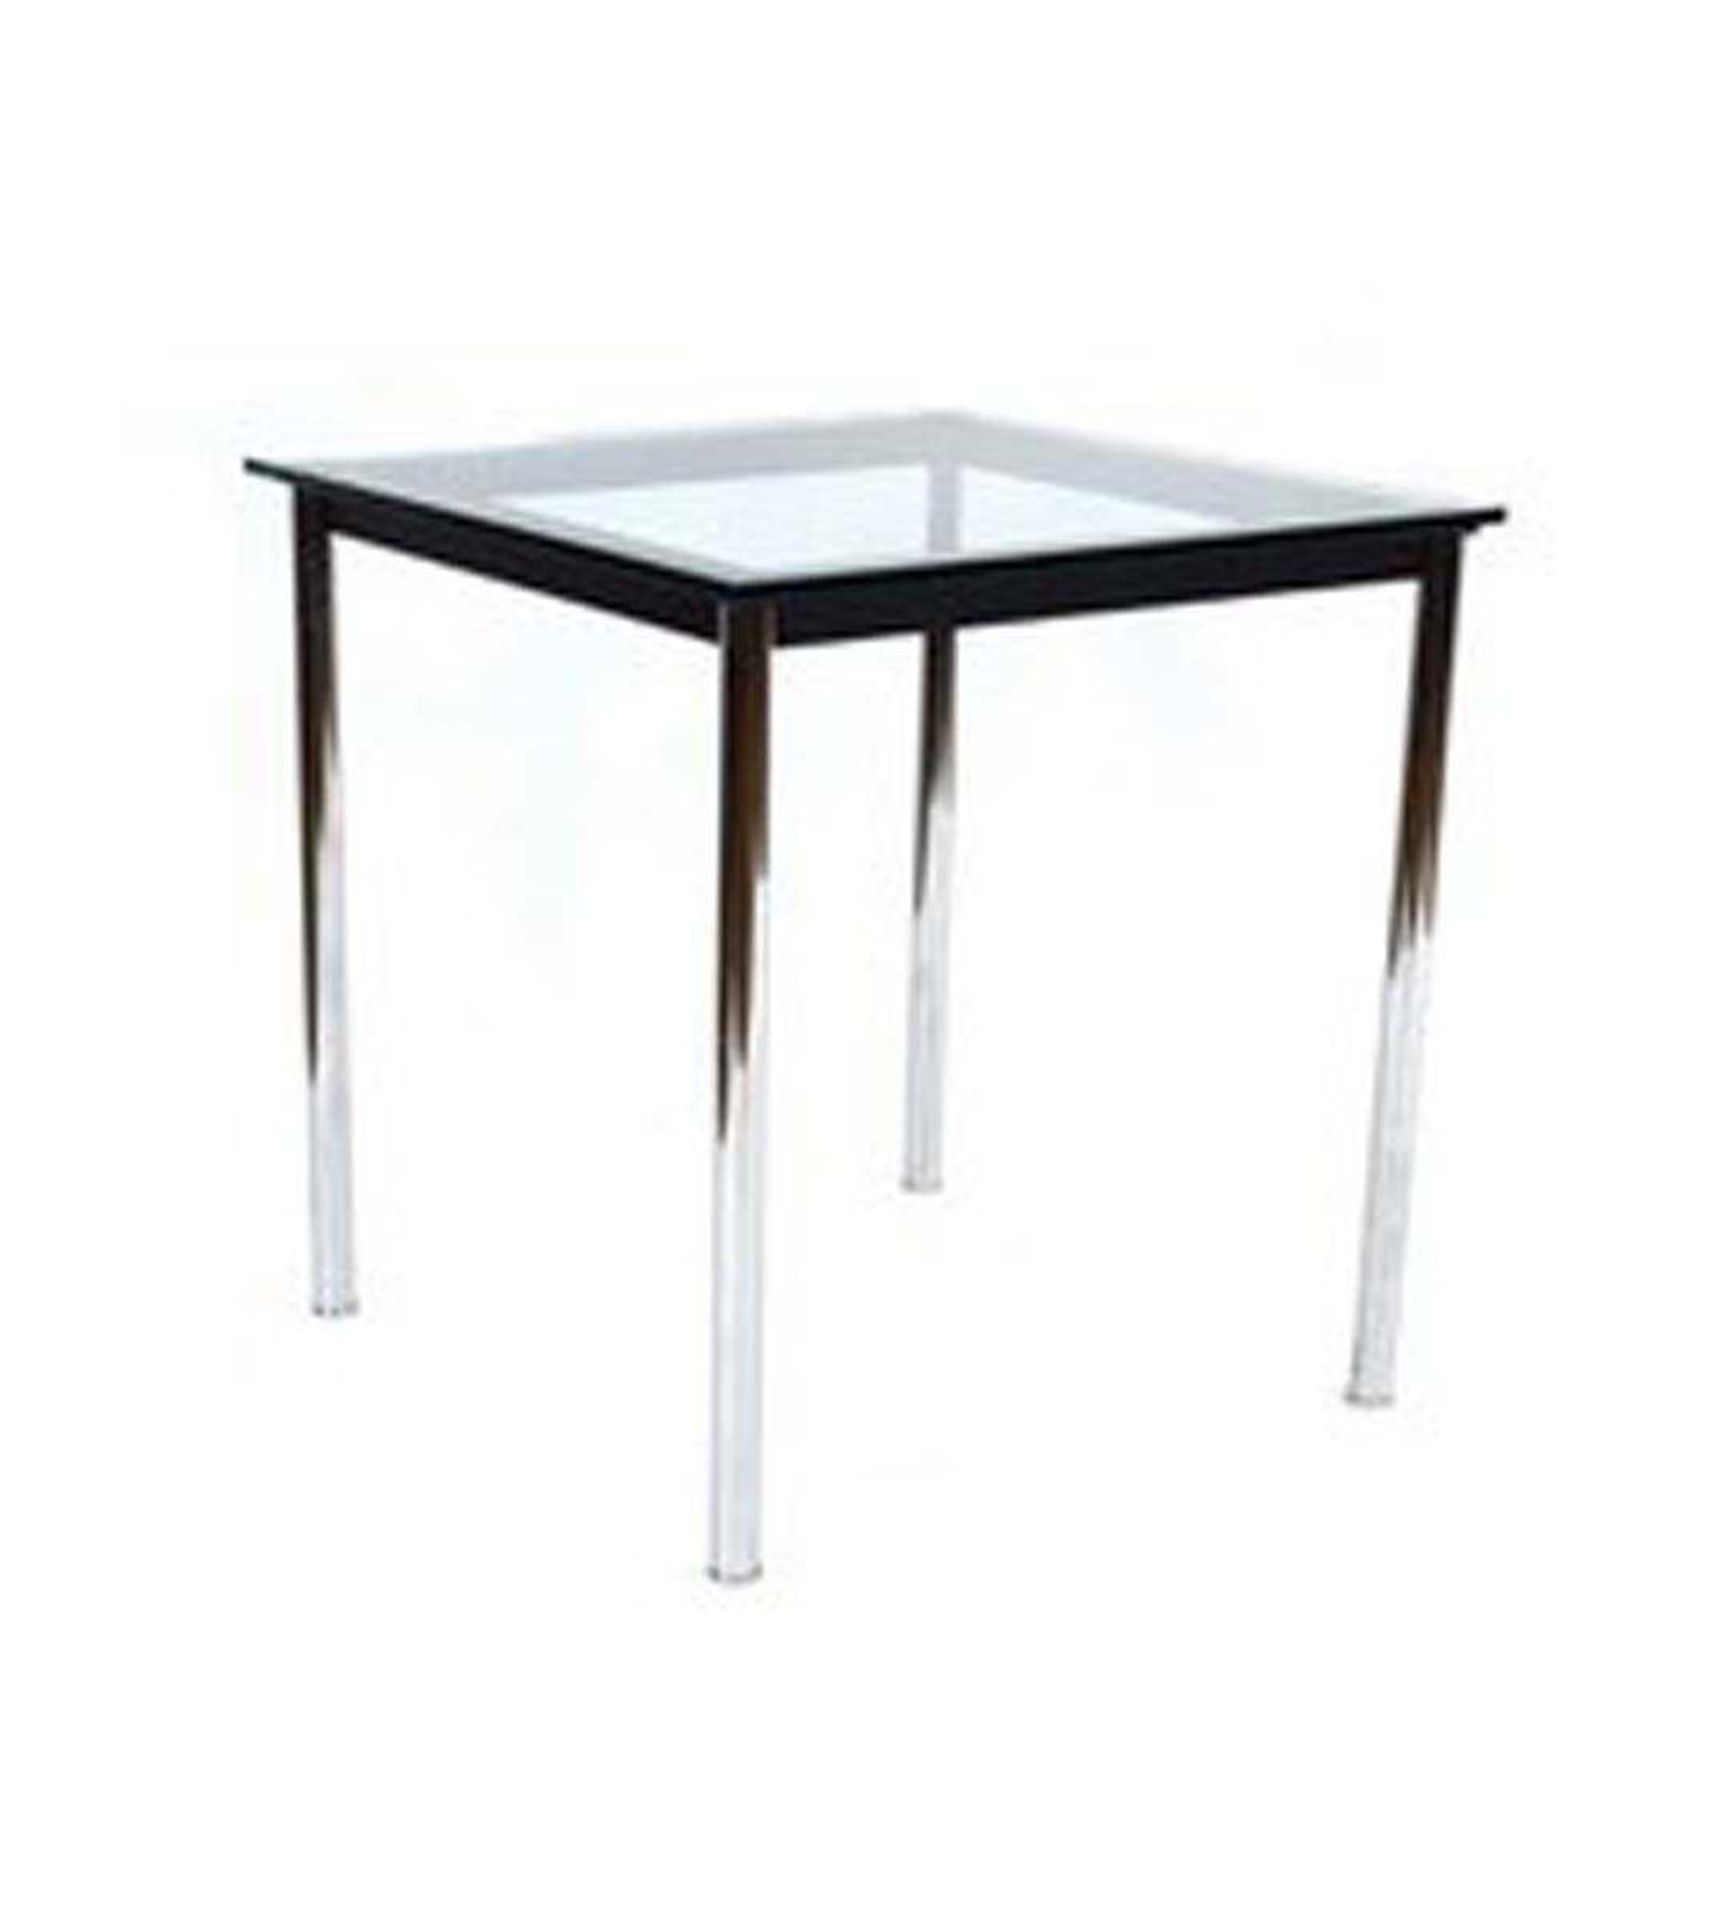 In the manner of Le Corbusier, a contemporary chromed table with a square glass surface, 70 x 70 cm